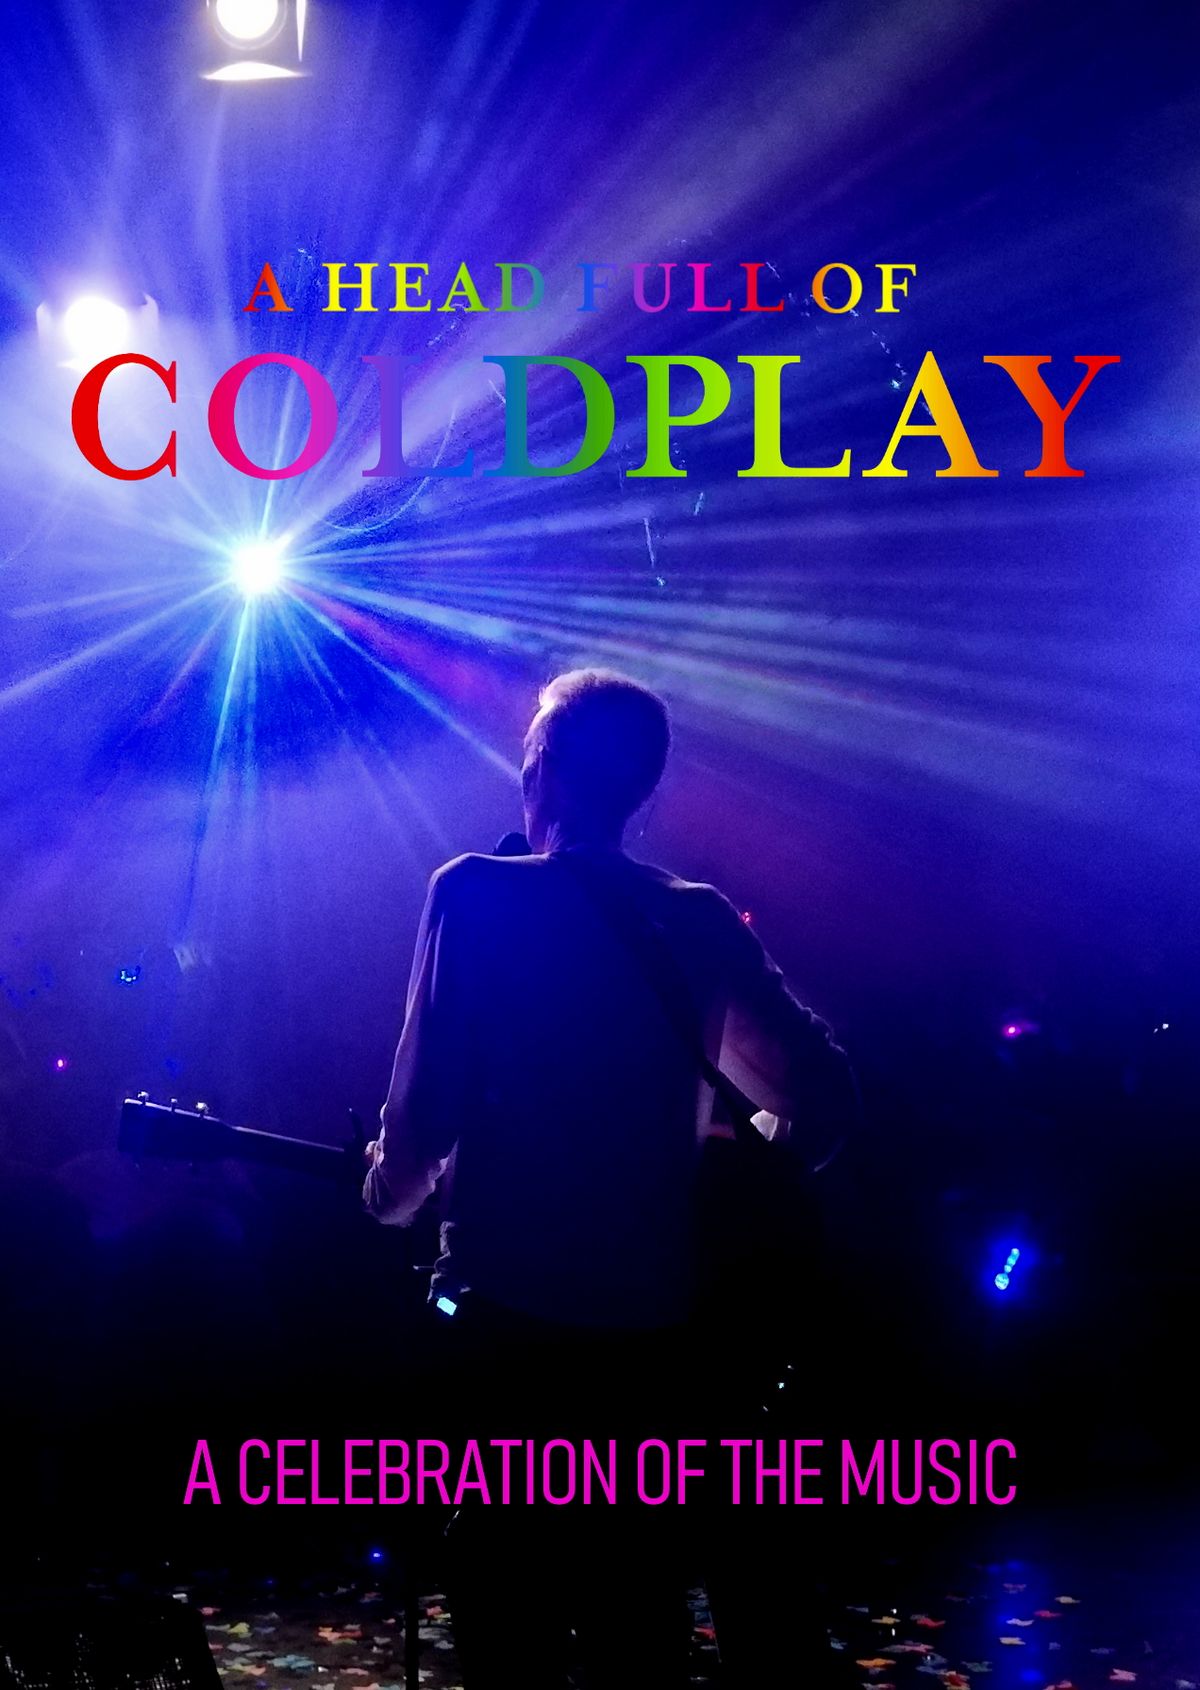 A Head Full Of Coldplay -  A Celebration Of The Music